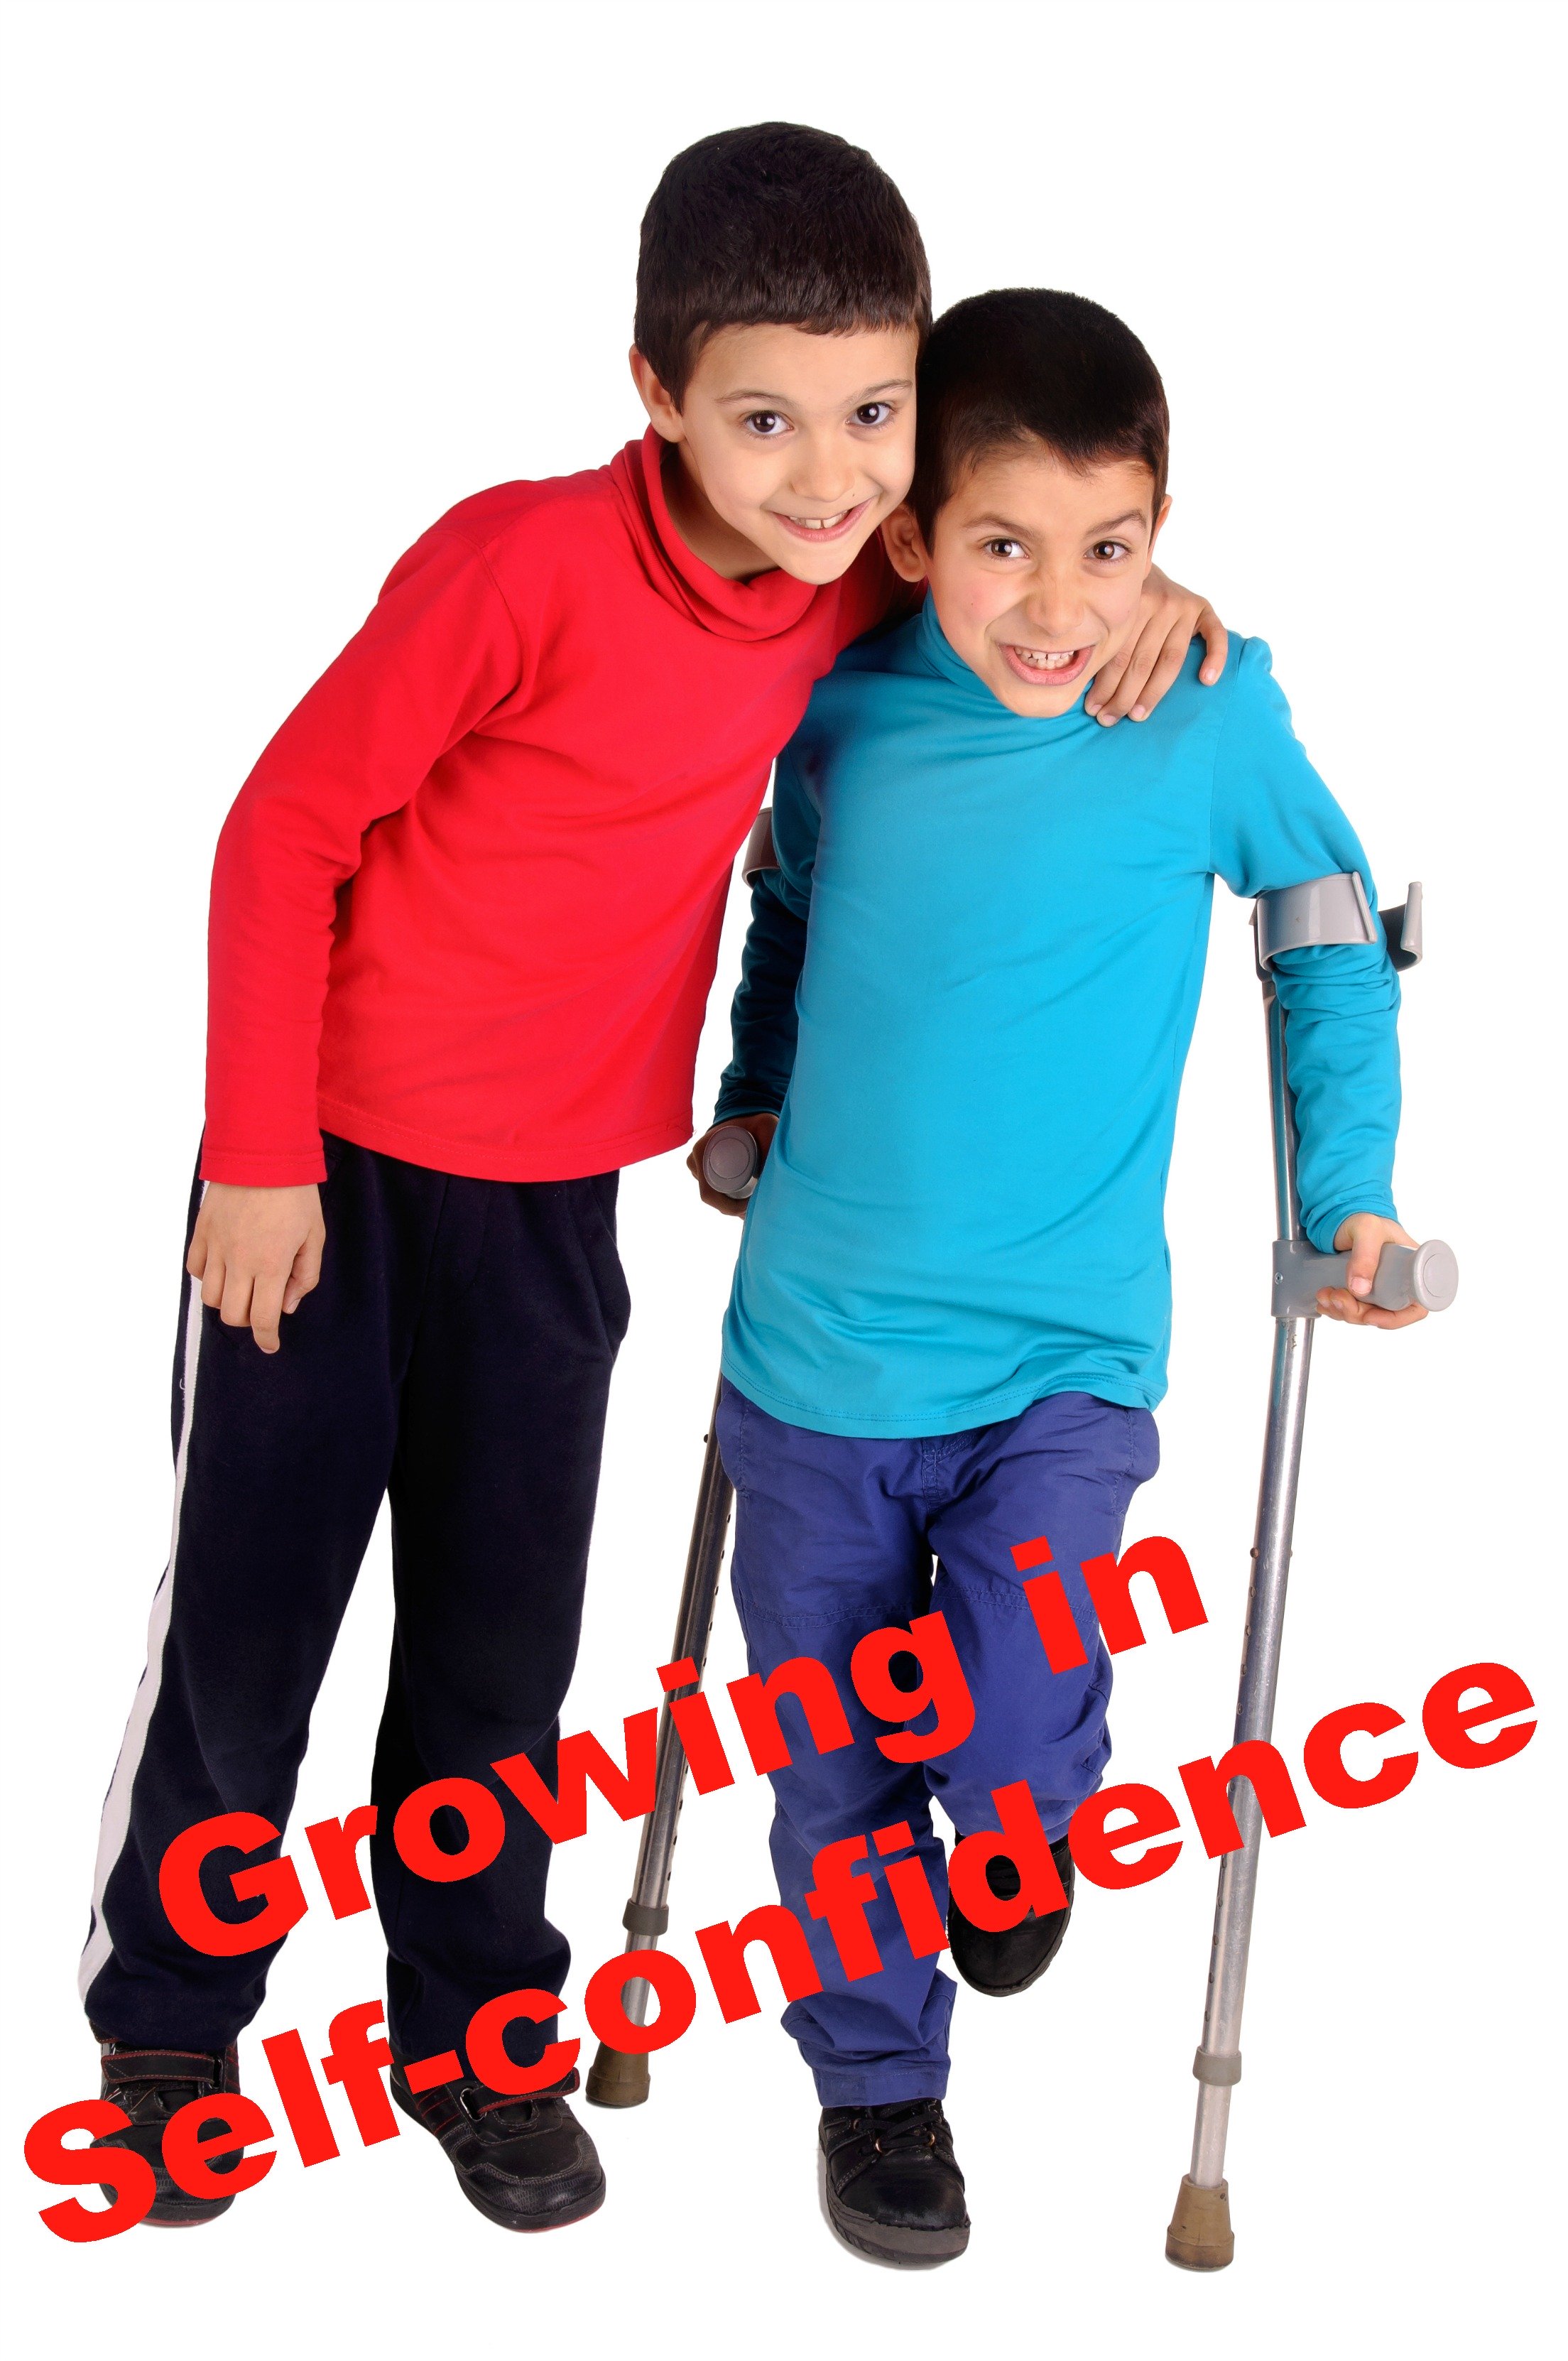 Two elemetary-school boys (one with crutches) supporting each other as they both stand. Caption: "Growing in Self-confidence"